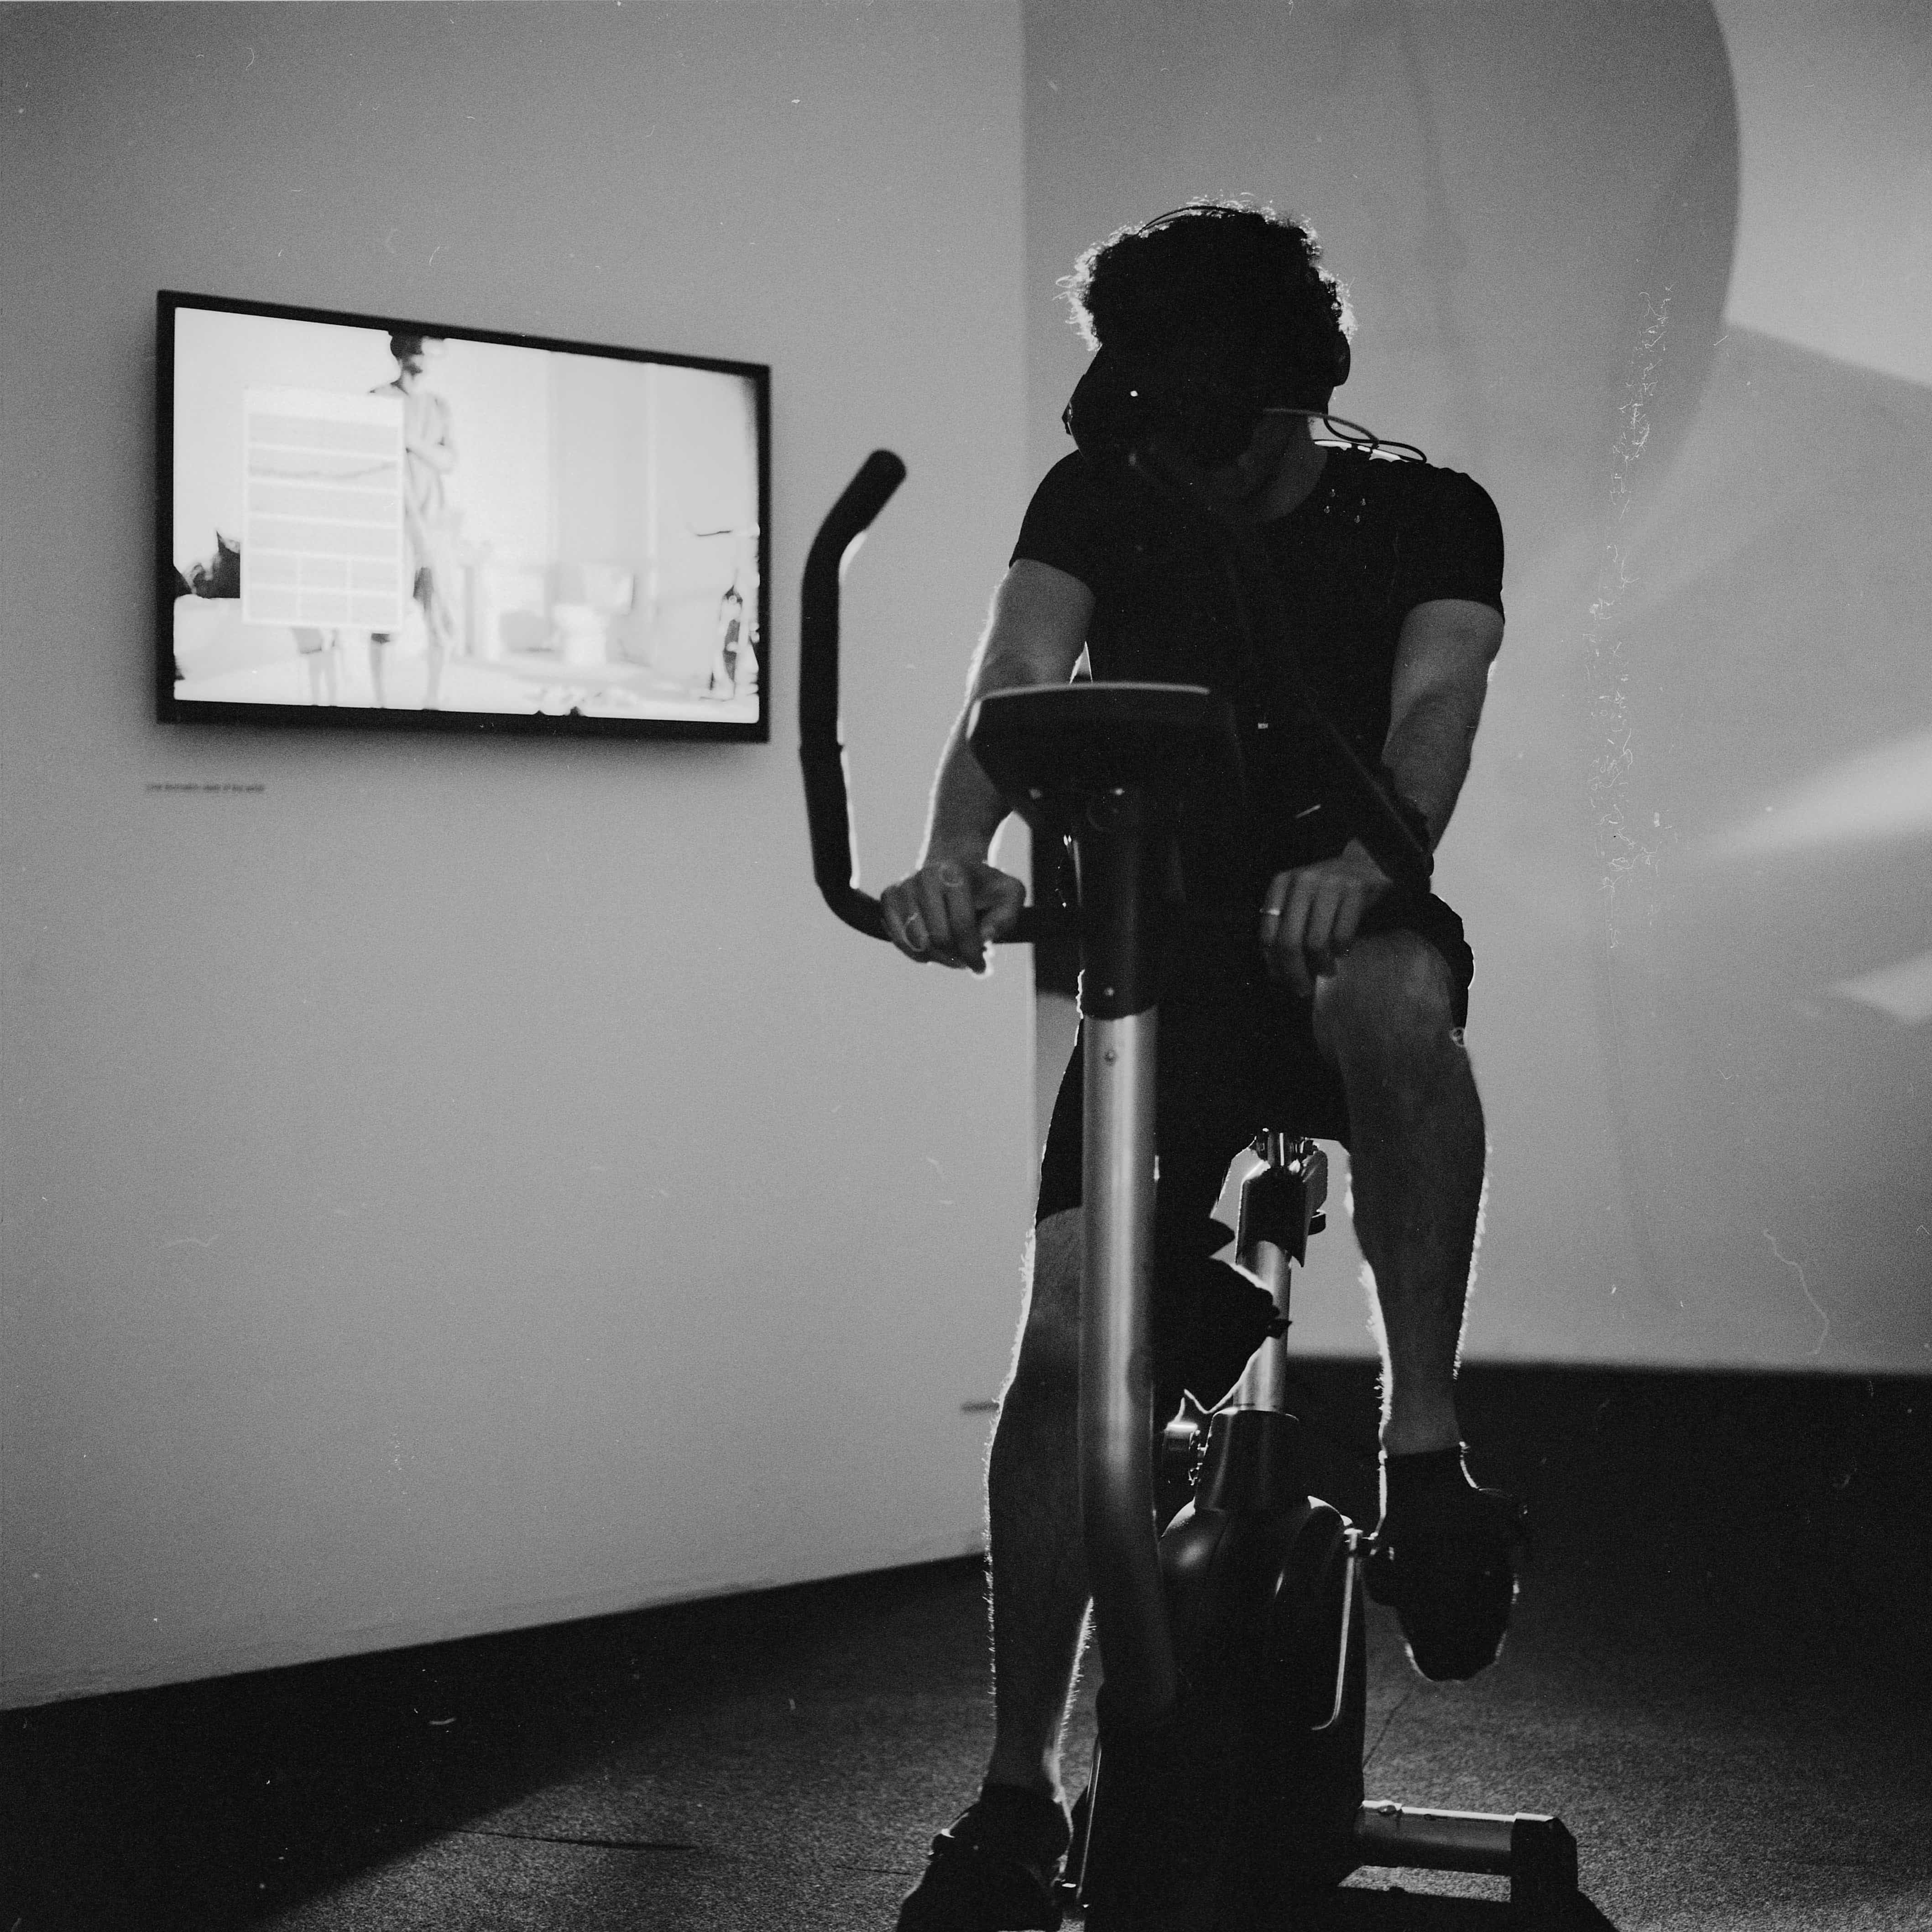 The artist with the VR headset on, on an exercise bike.